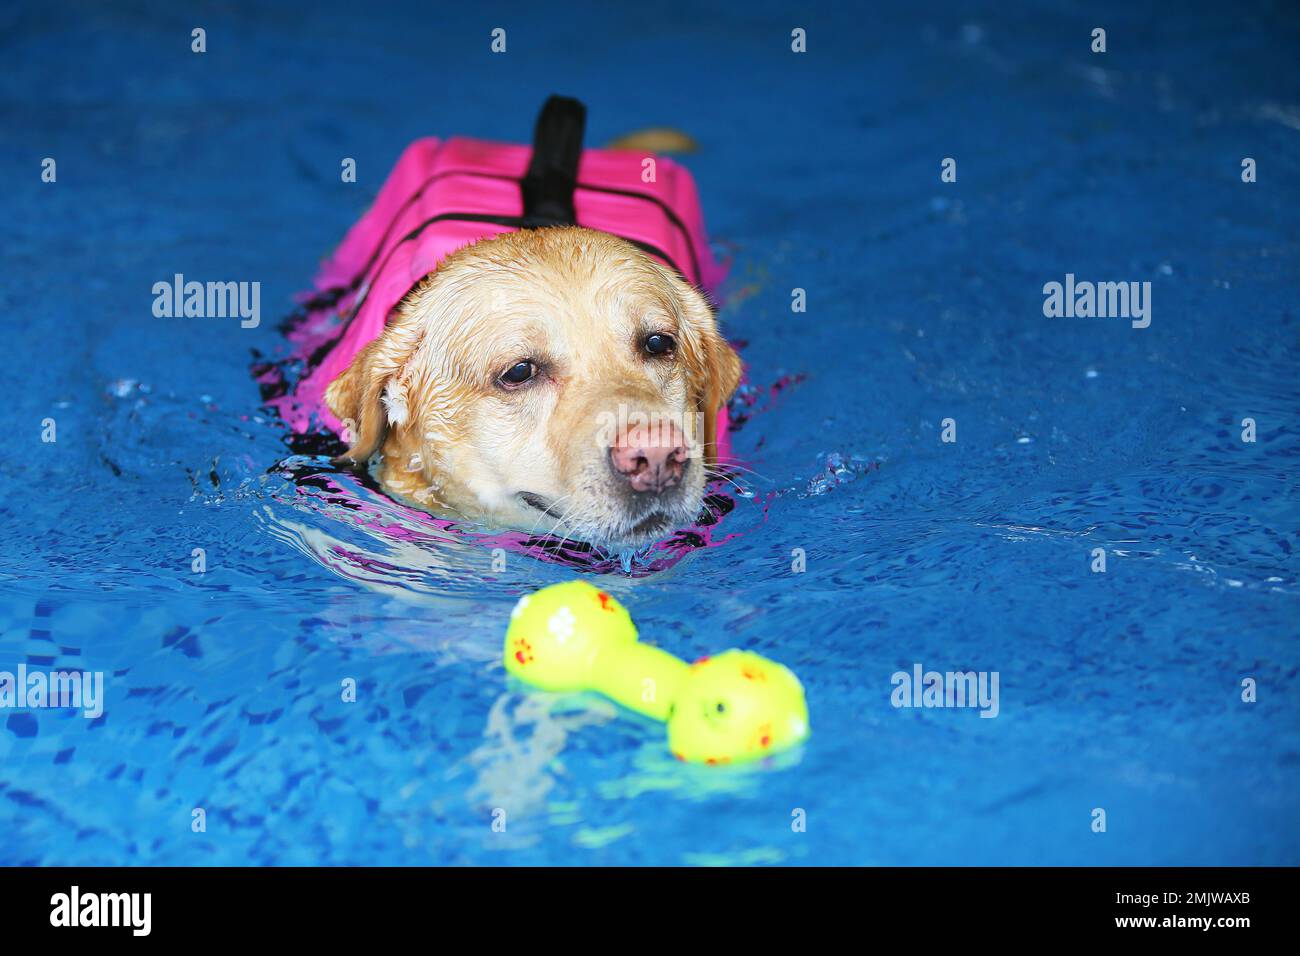 Labrador Retriever wearing life jacket and playing with toy in the pool. Dog swimming. Stock Photo